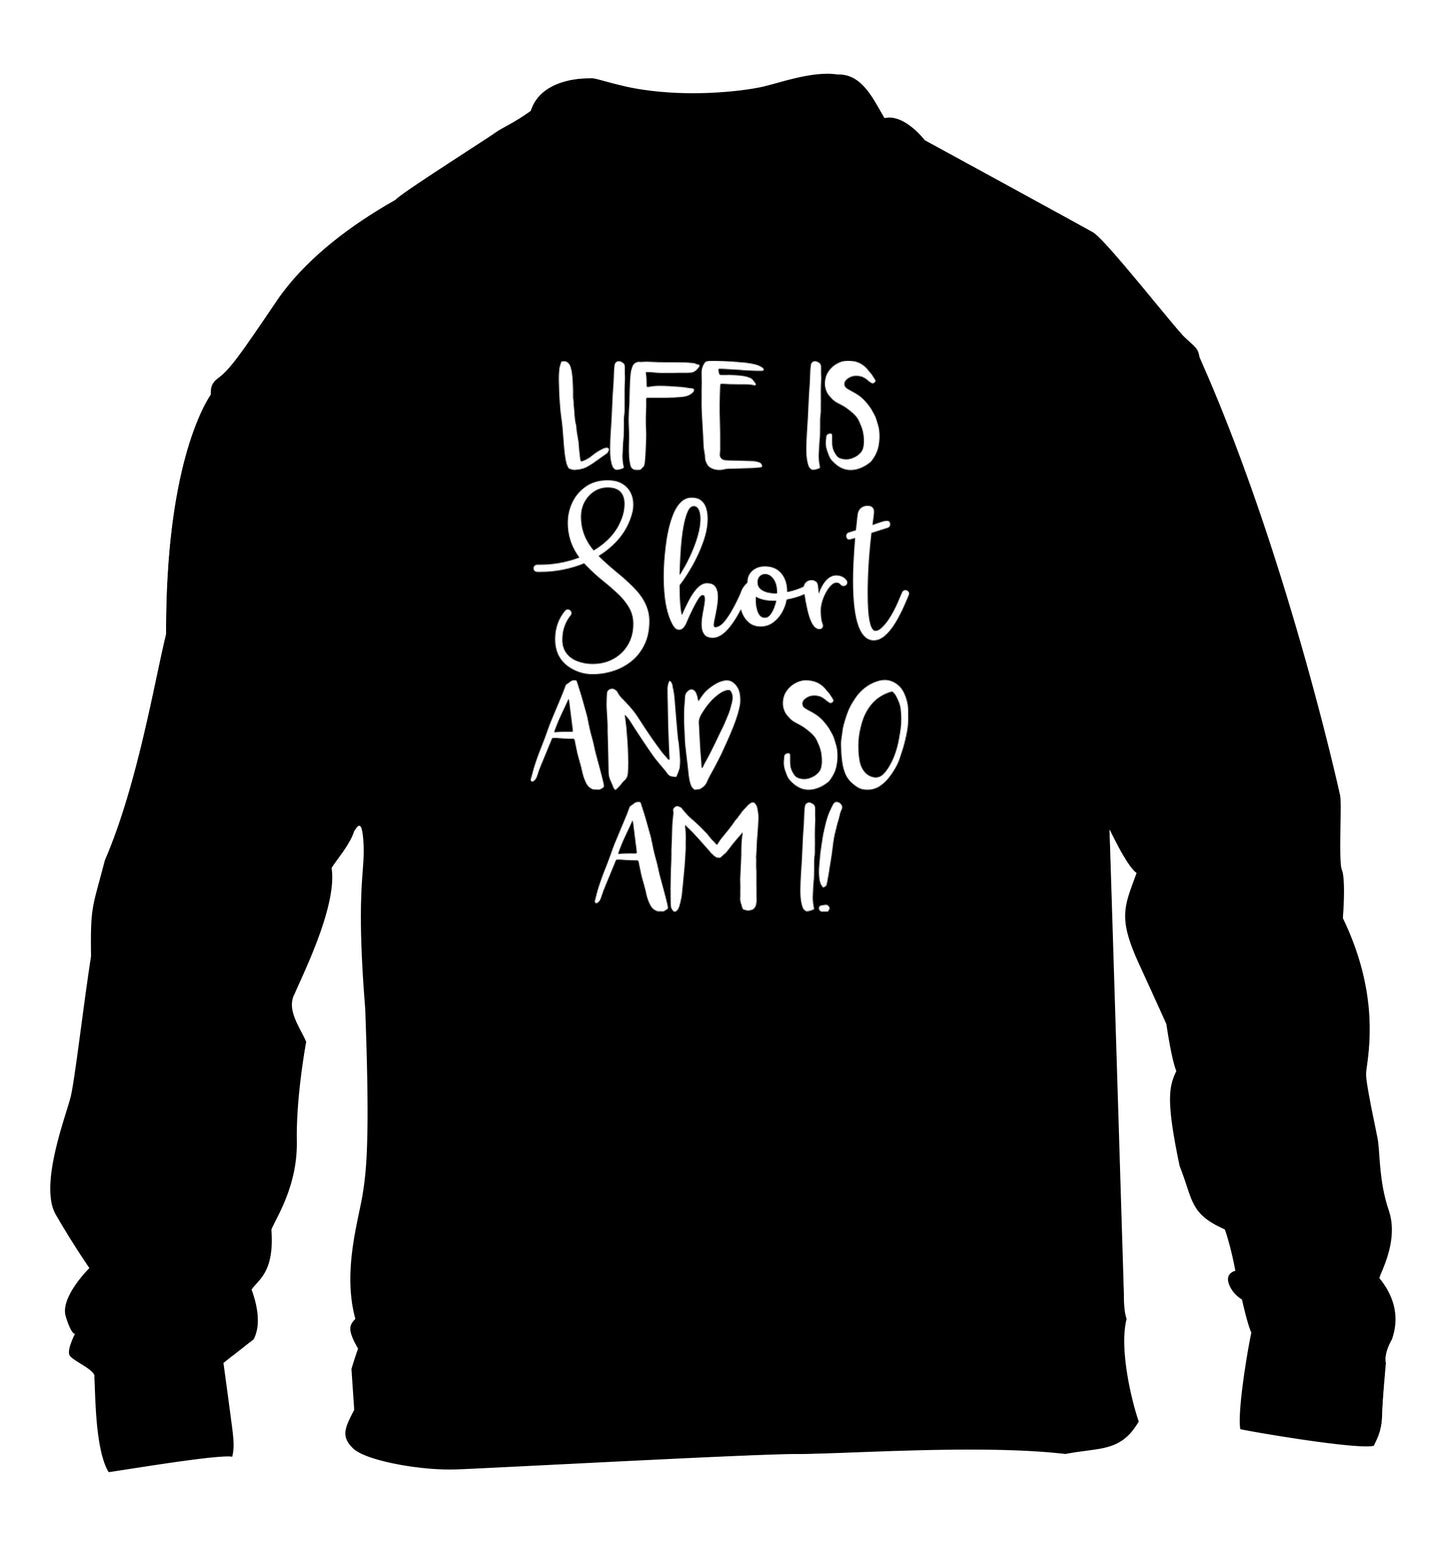 Life is short and so am I! children's black sweater 12-13 Years